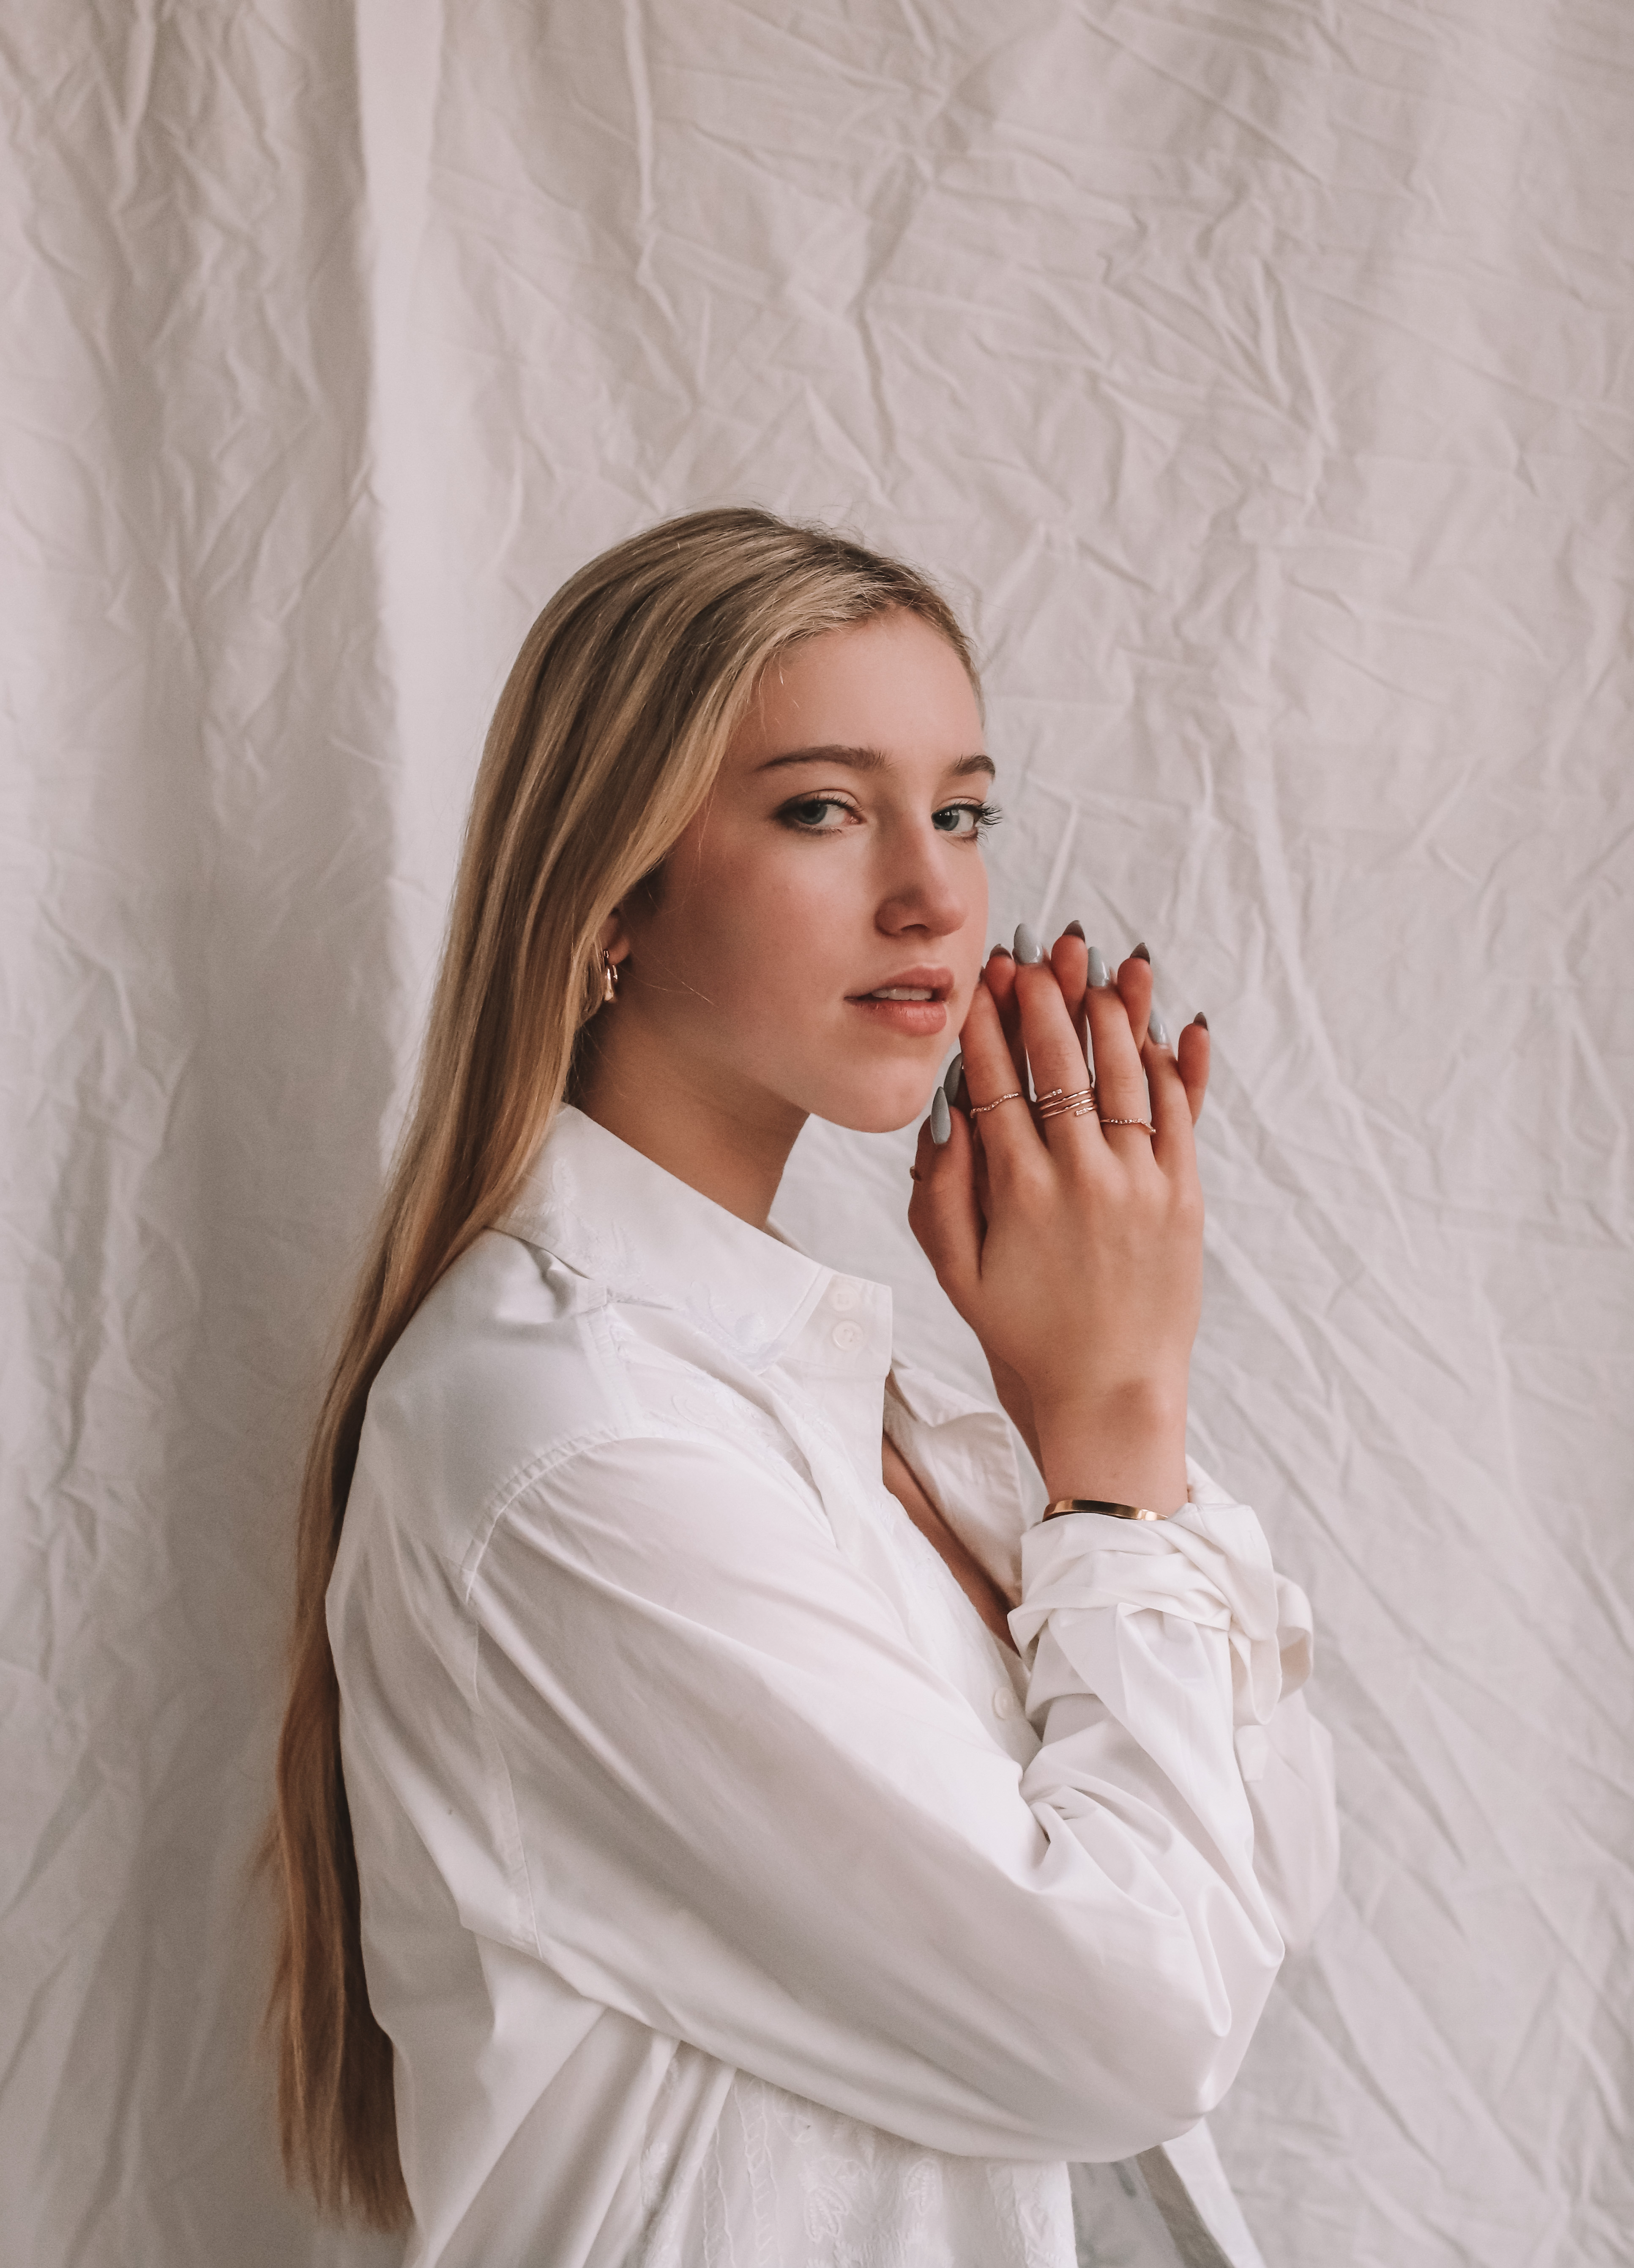 editorial photo of a girl with blonde hair wearing a white button-down and gold jewelry resting her face on her hands